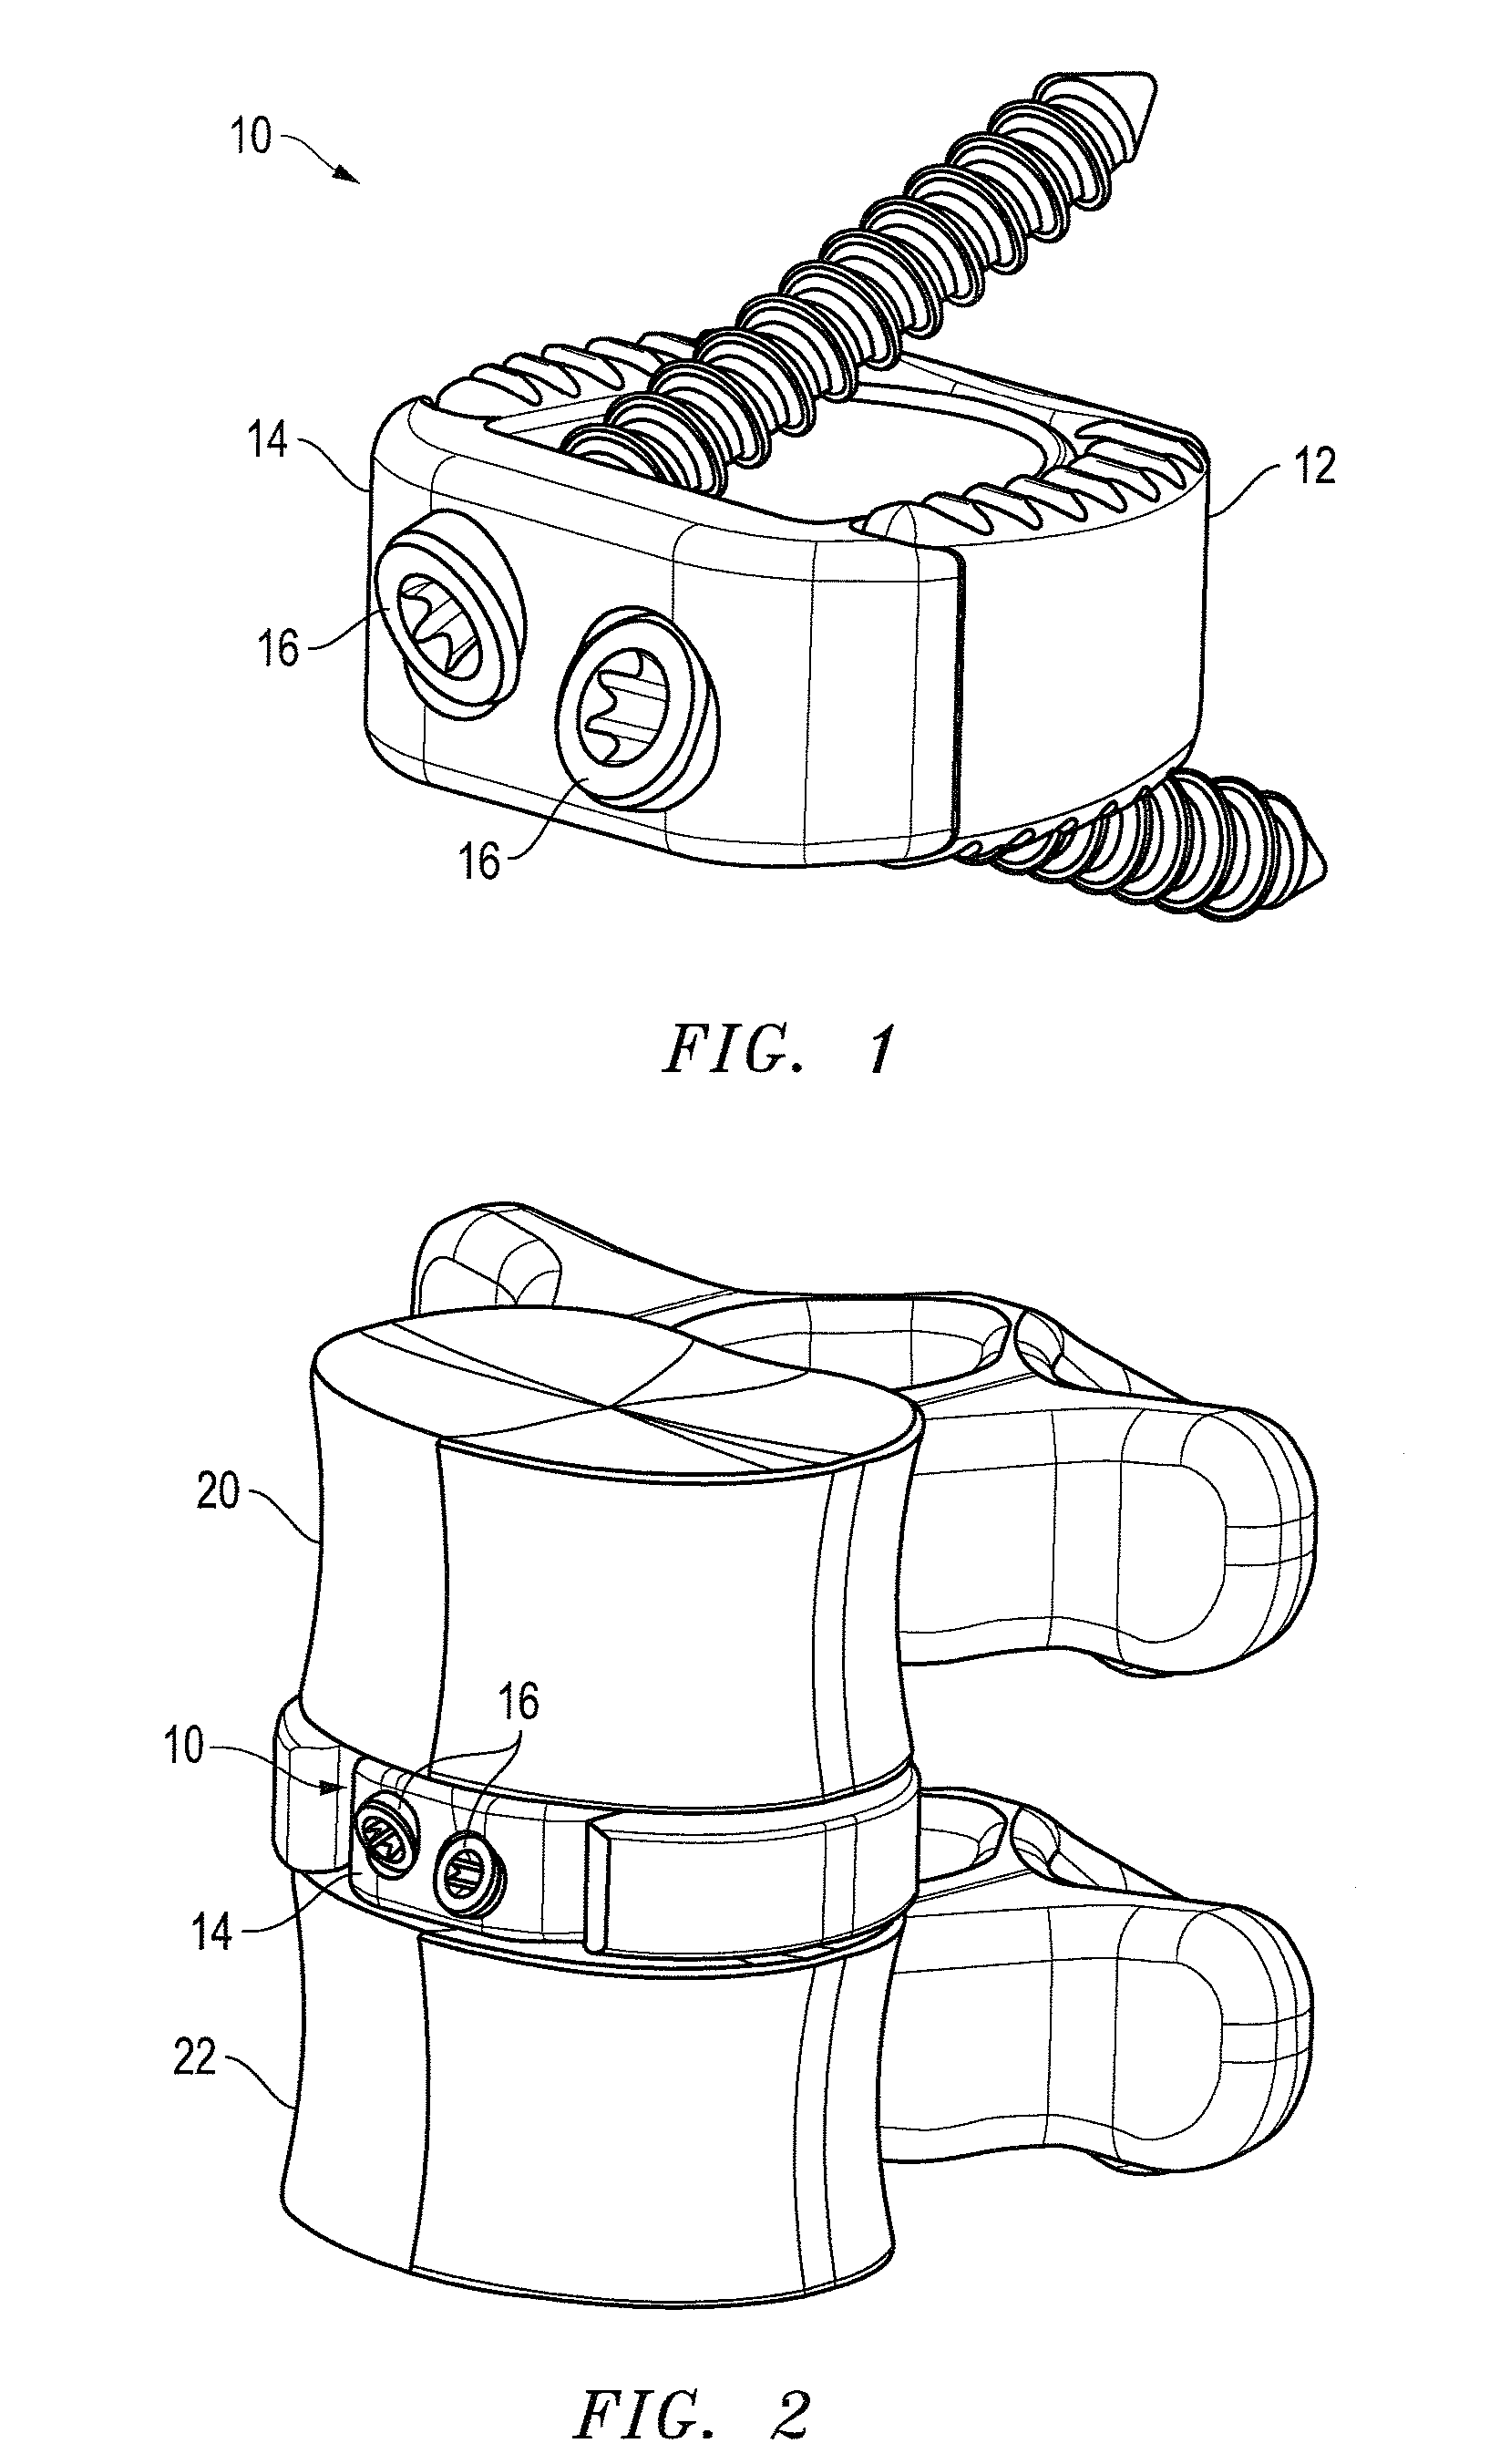 Interbody fusion device with snap on anterior plate and associated methods